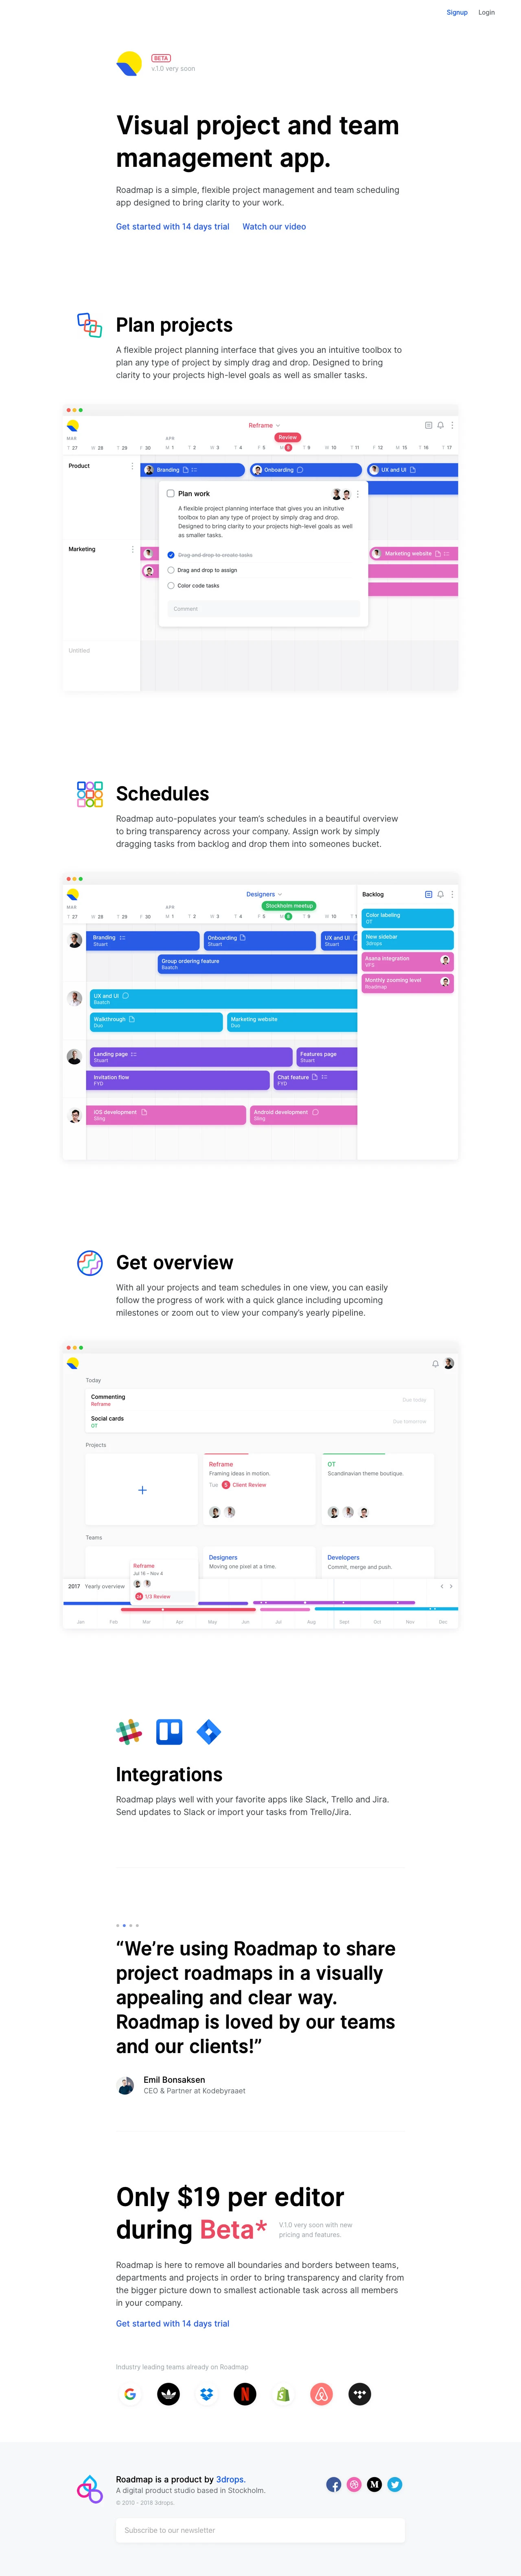 Roadmap Landing Page Example: Roadmap is a simple, flexible project management and team scheduling app designed to bring clarity to your work.